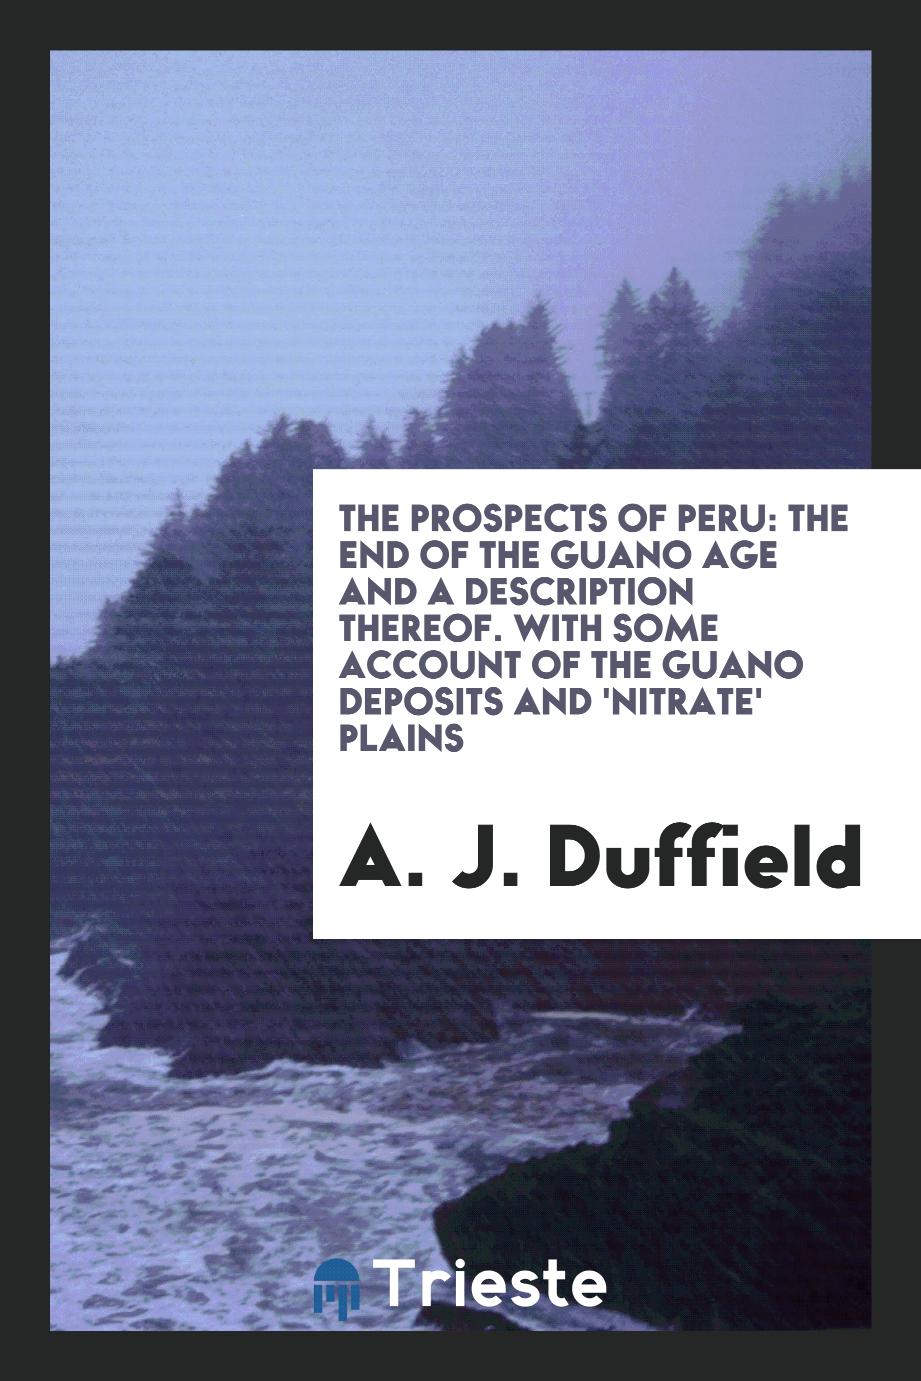 The Prospects of Peru: The End of the Guano Age and a Description Thereof. With Some Account of the Guano Deposits and 'Nitrate' Plains